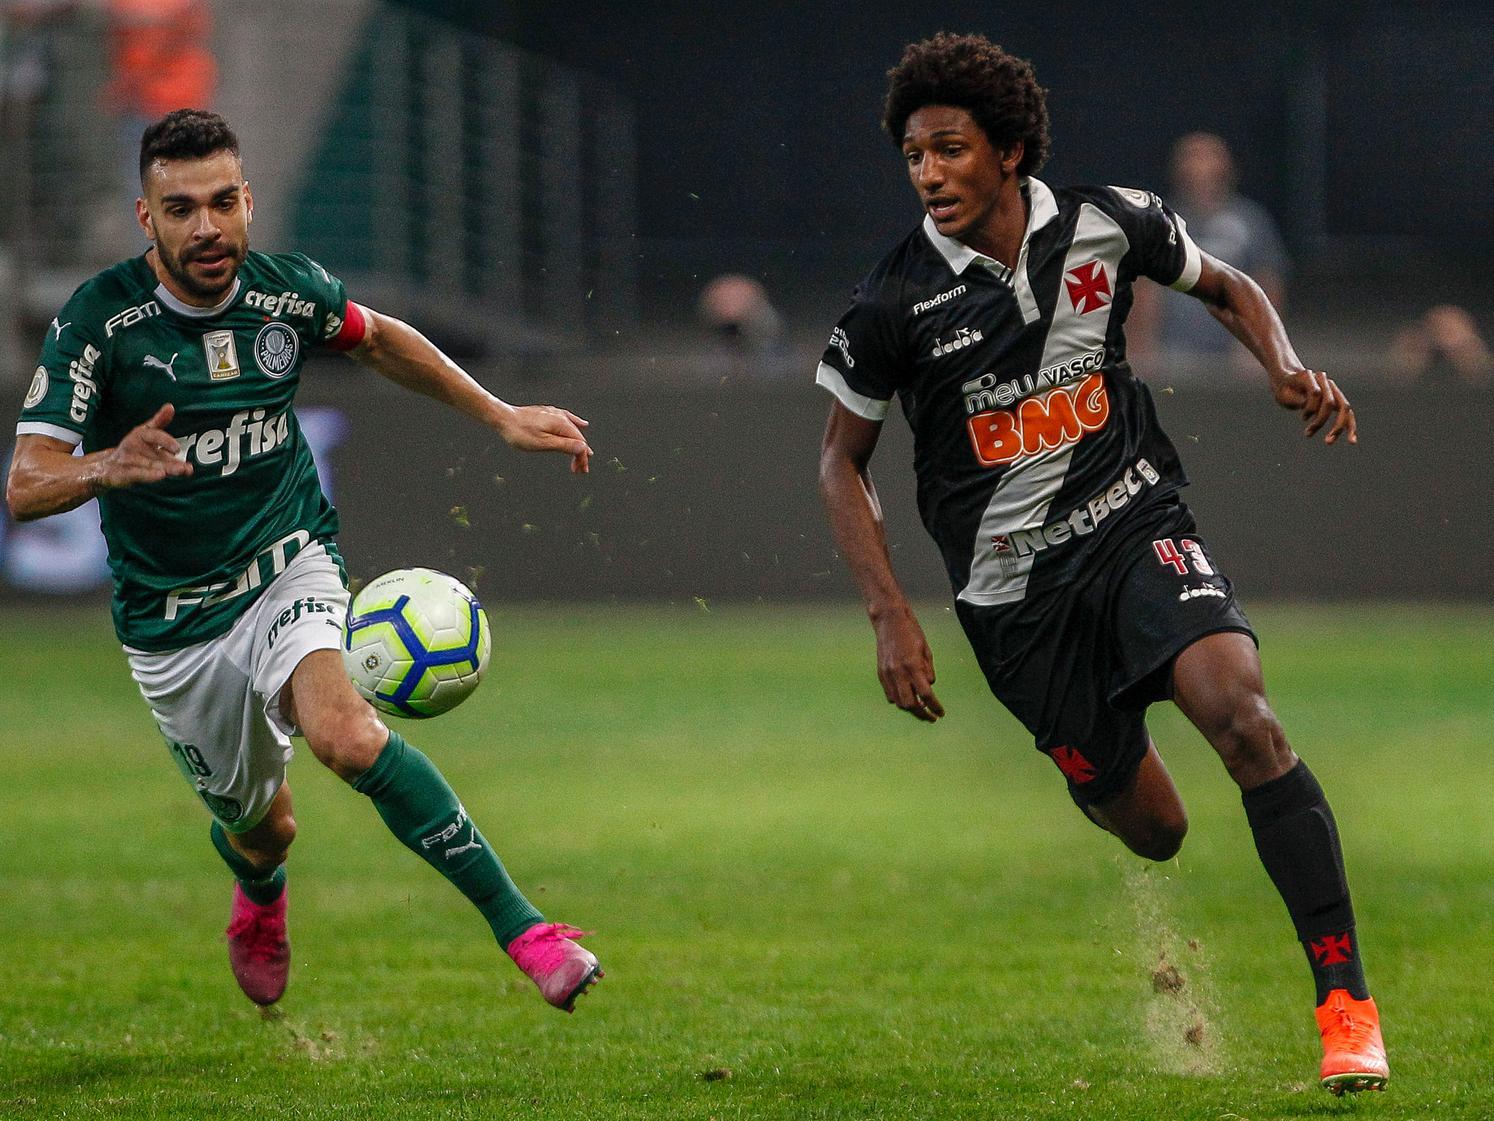 The Reds will look to take another step closer to the title this weekend. Meanwhile, they're said to be stepping up their efforts to land Brazilain wonderkid forward Talles Magno, who plays for Vasco da Gama.